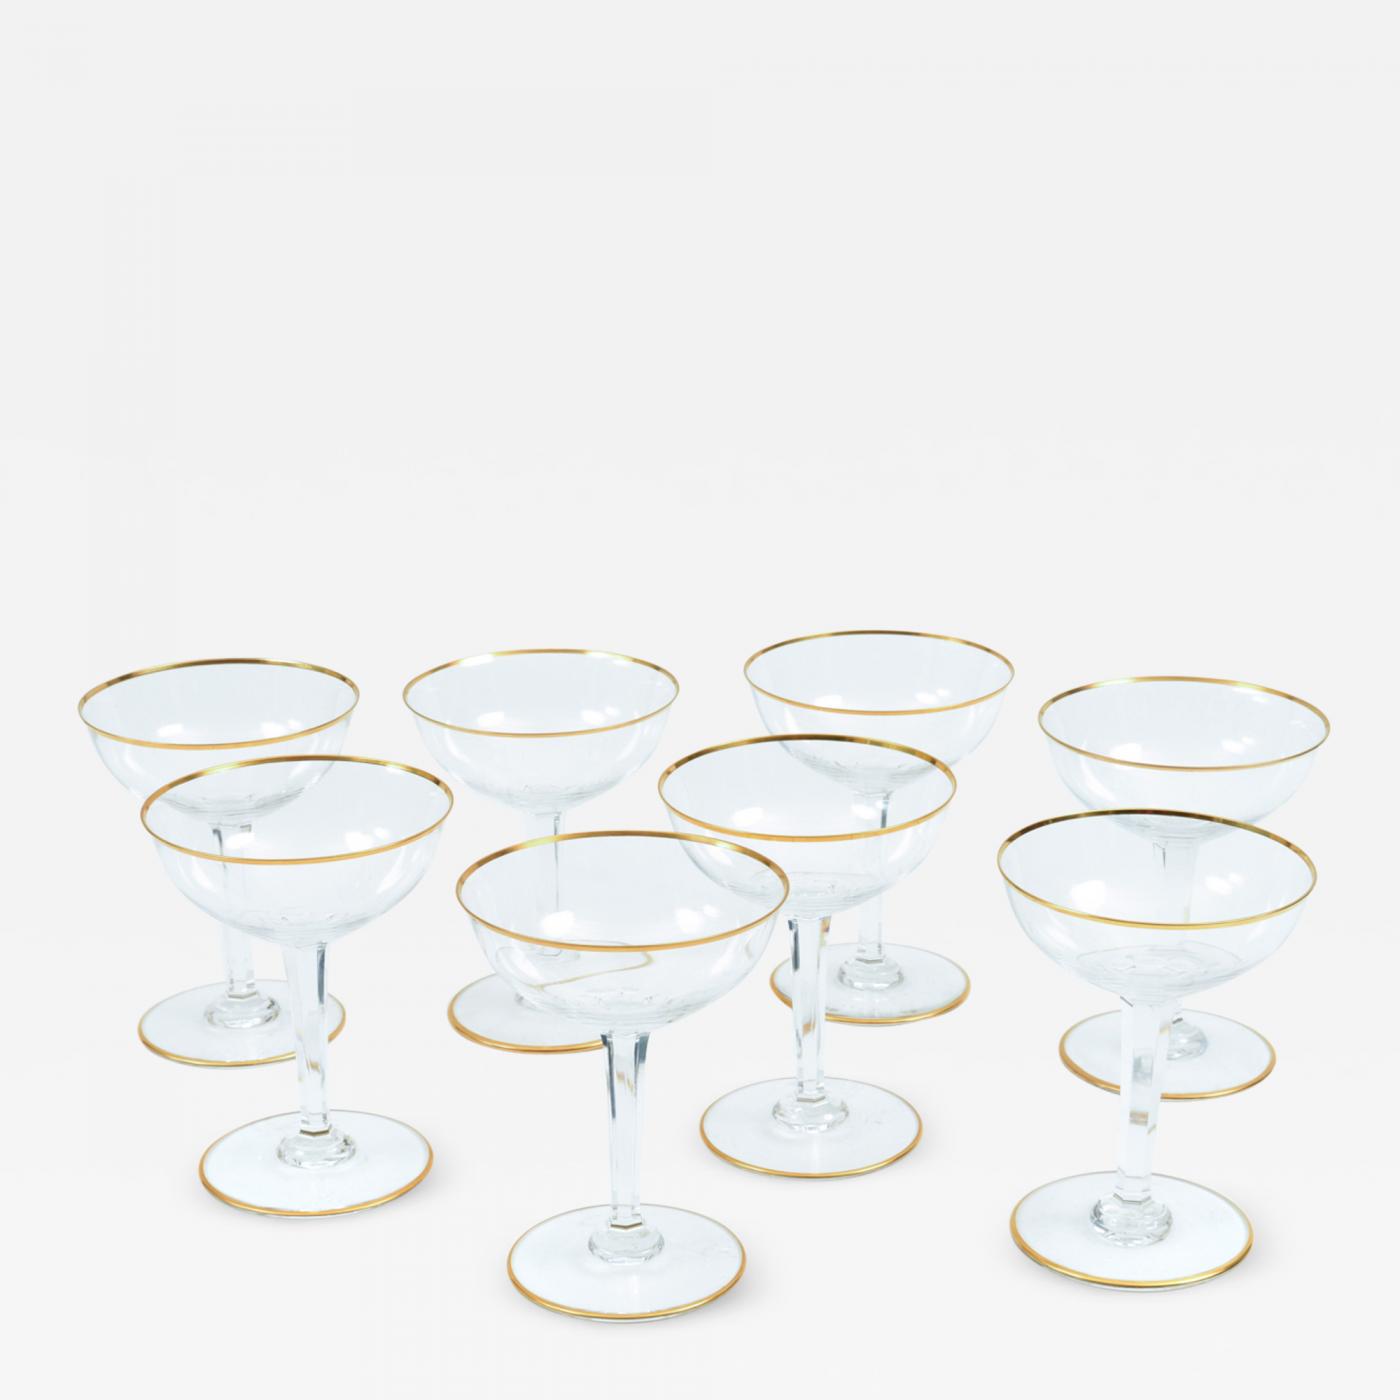 https://cdn.incollect.com/sites/default/files/zoom/Vintage-Baccarat-Crystal-Barware-Champagne-Coupe-Service-for-Eight-People-296615-948122.jpg